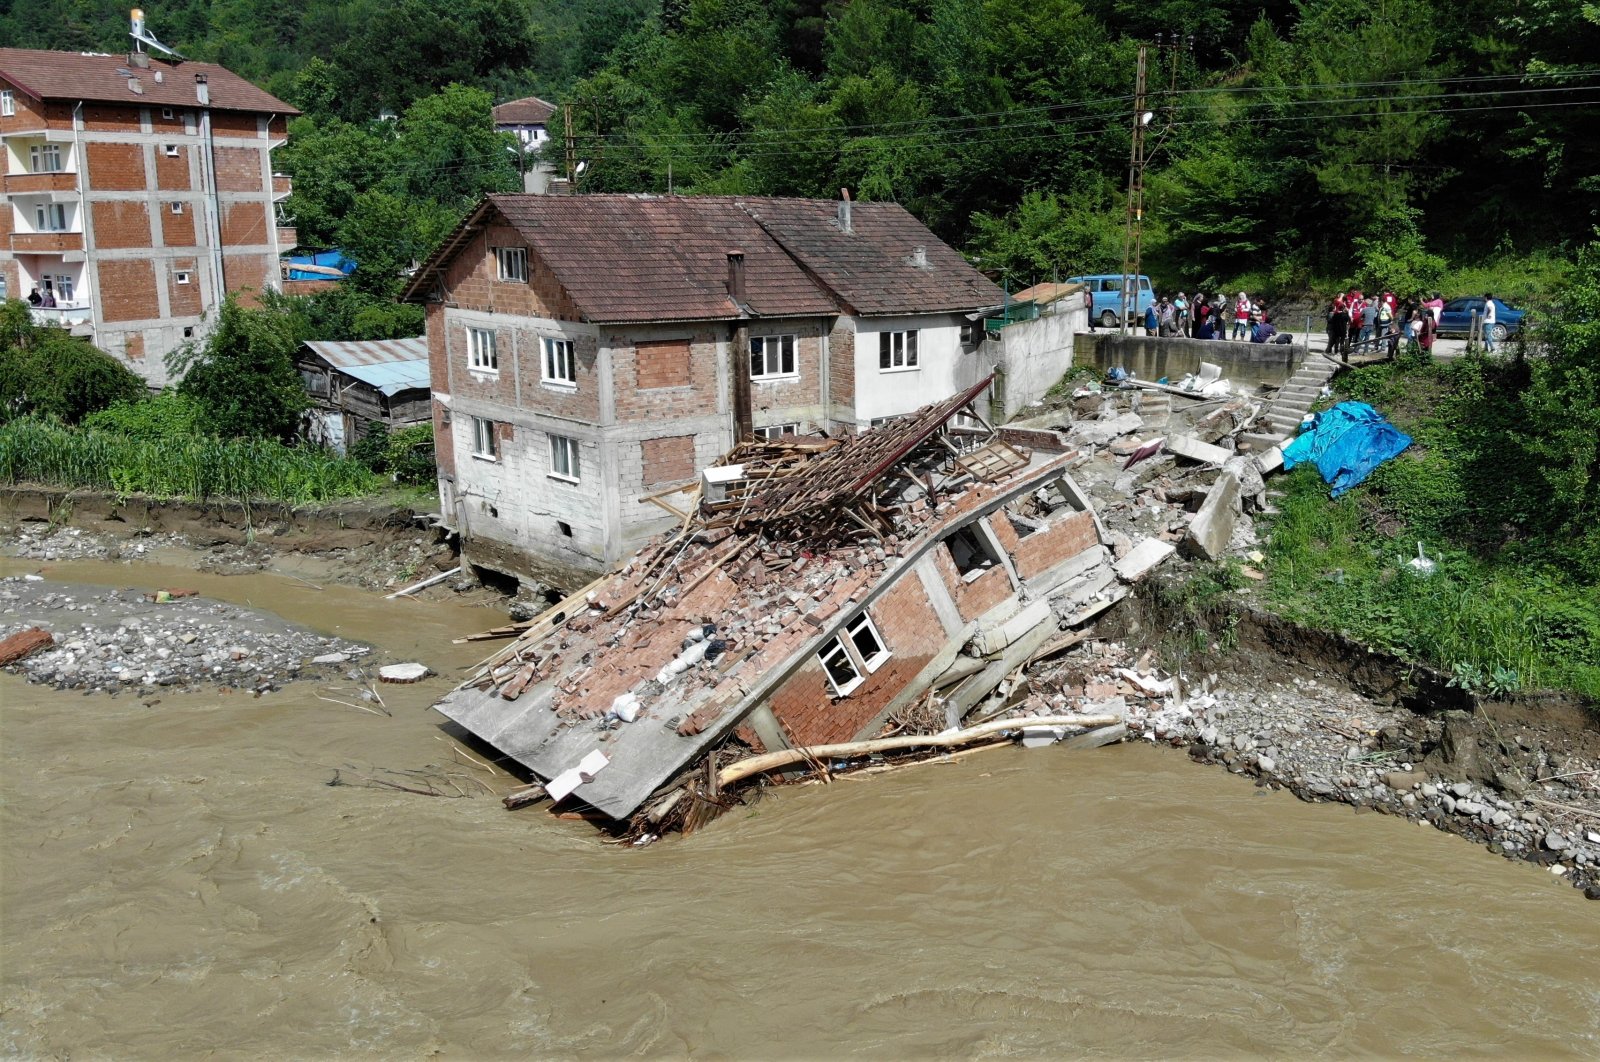 A view of a collapsed house during recent floods, in Karabük, northern Turkey, June 29, 2022. (İHA PHOTO)